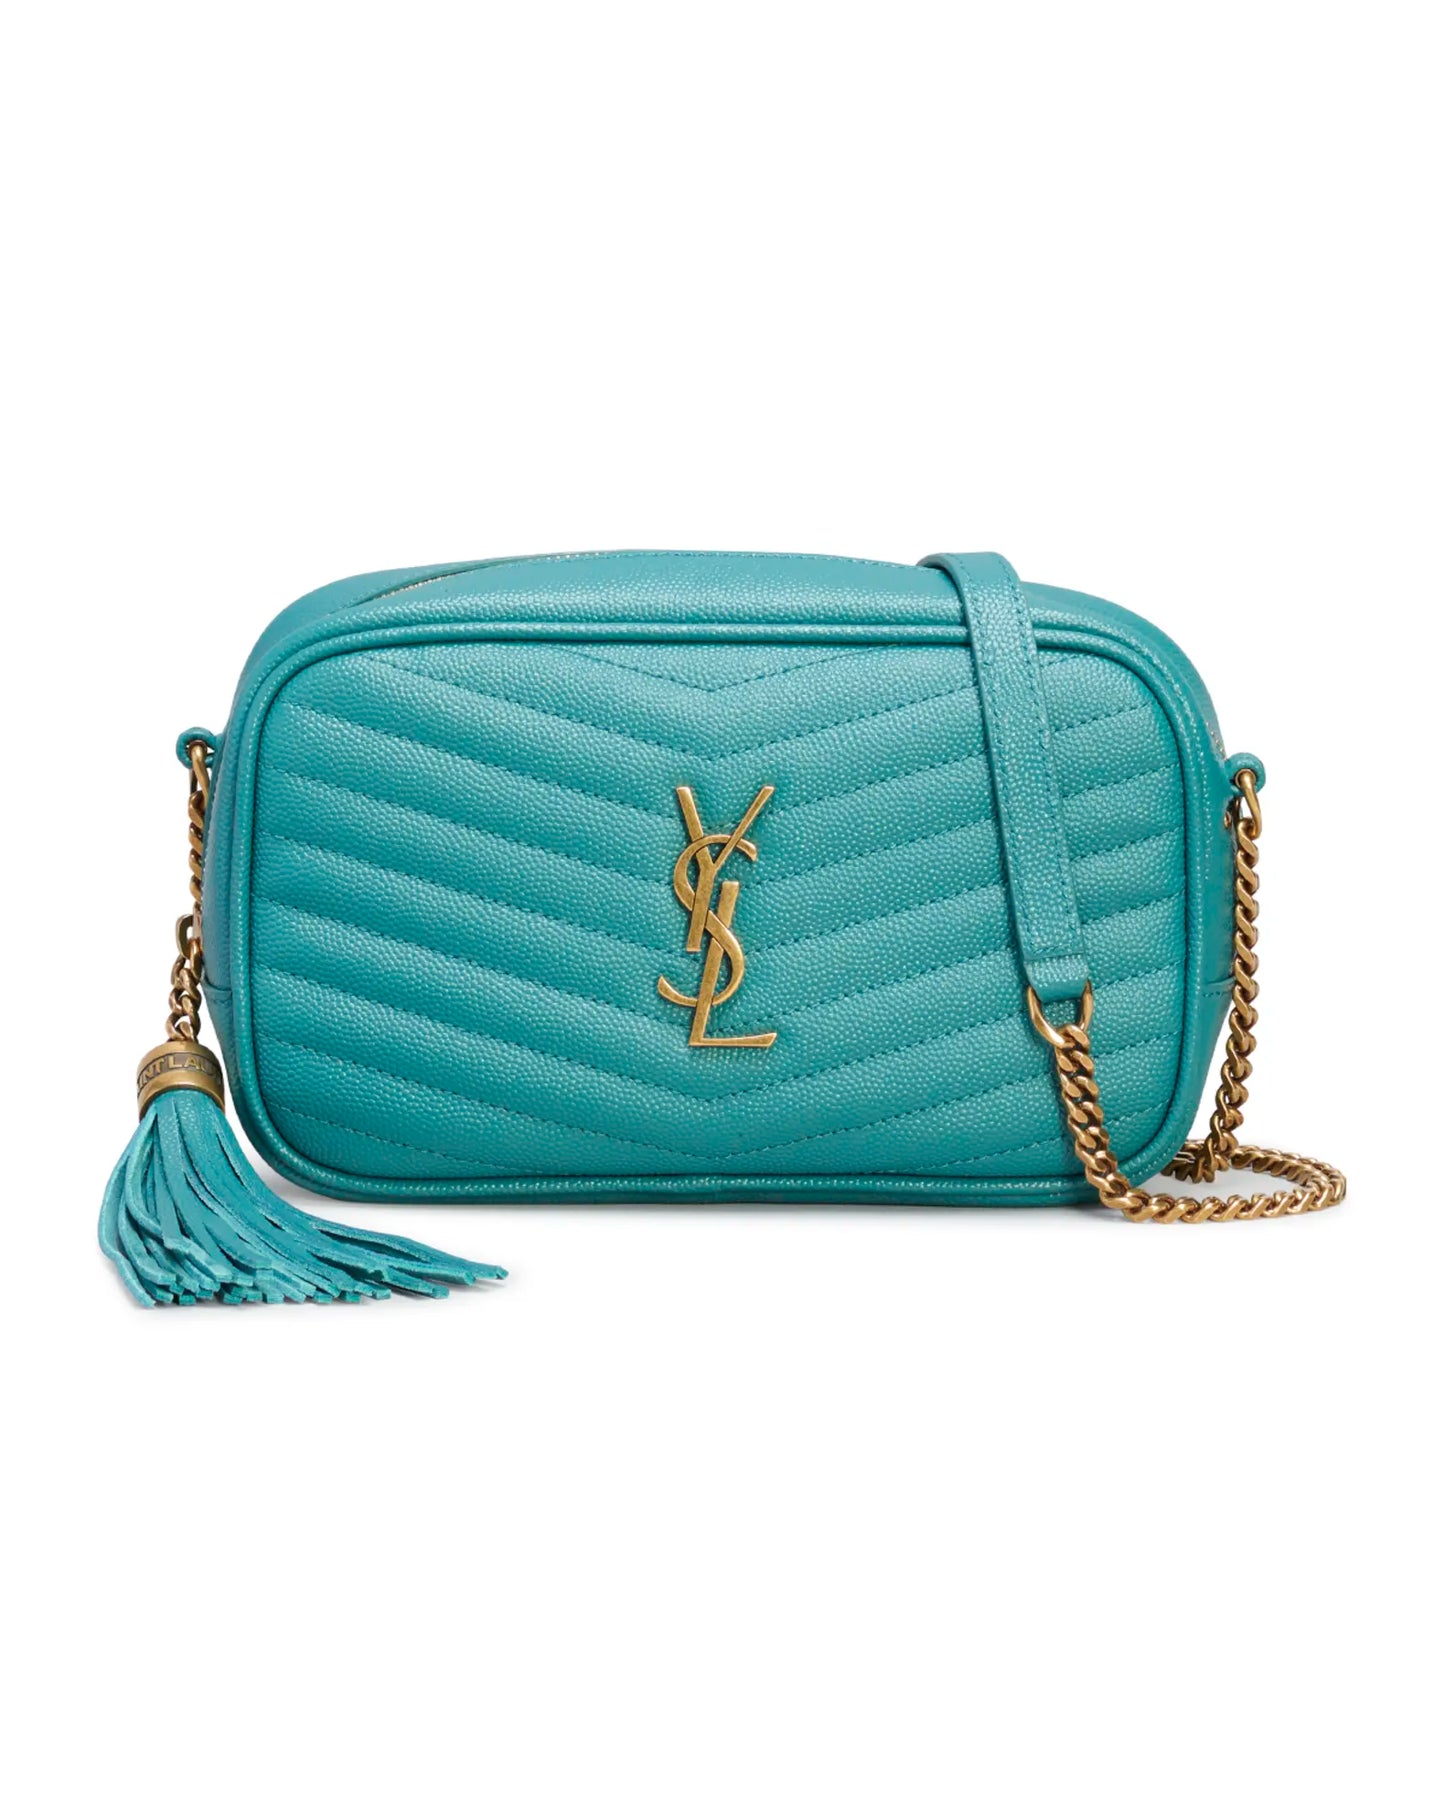 The New YSL Saint Laurent Shiny Mini Lou Camera Bag in Smooth